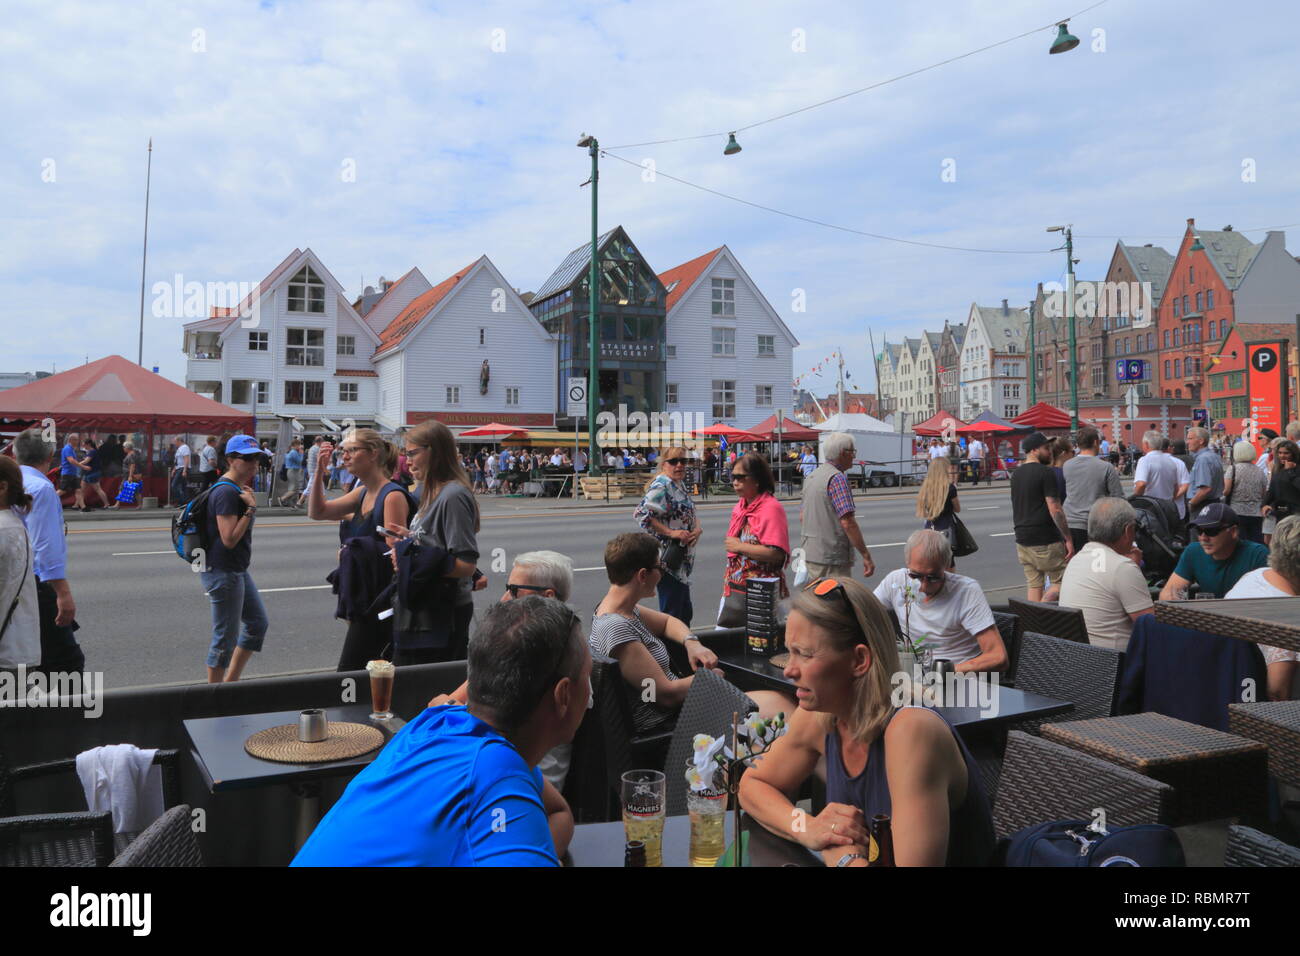 People visit Bergen city in Norway, on the traditional Market Day (Torgdagen) during the summer. Stock Photo